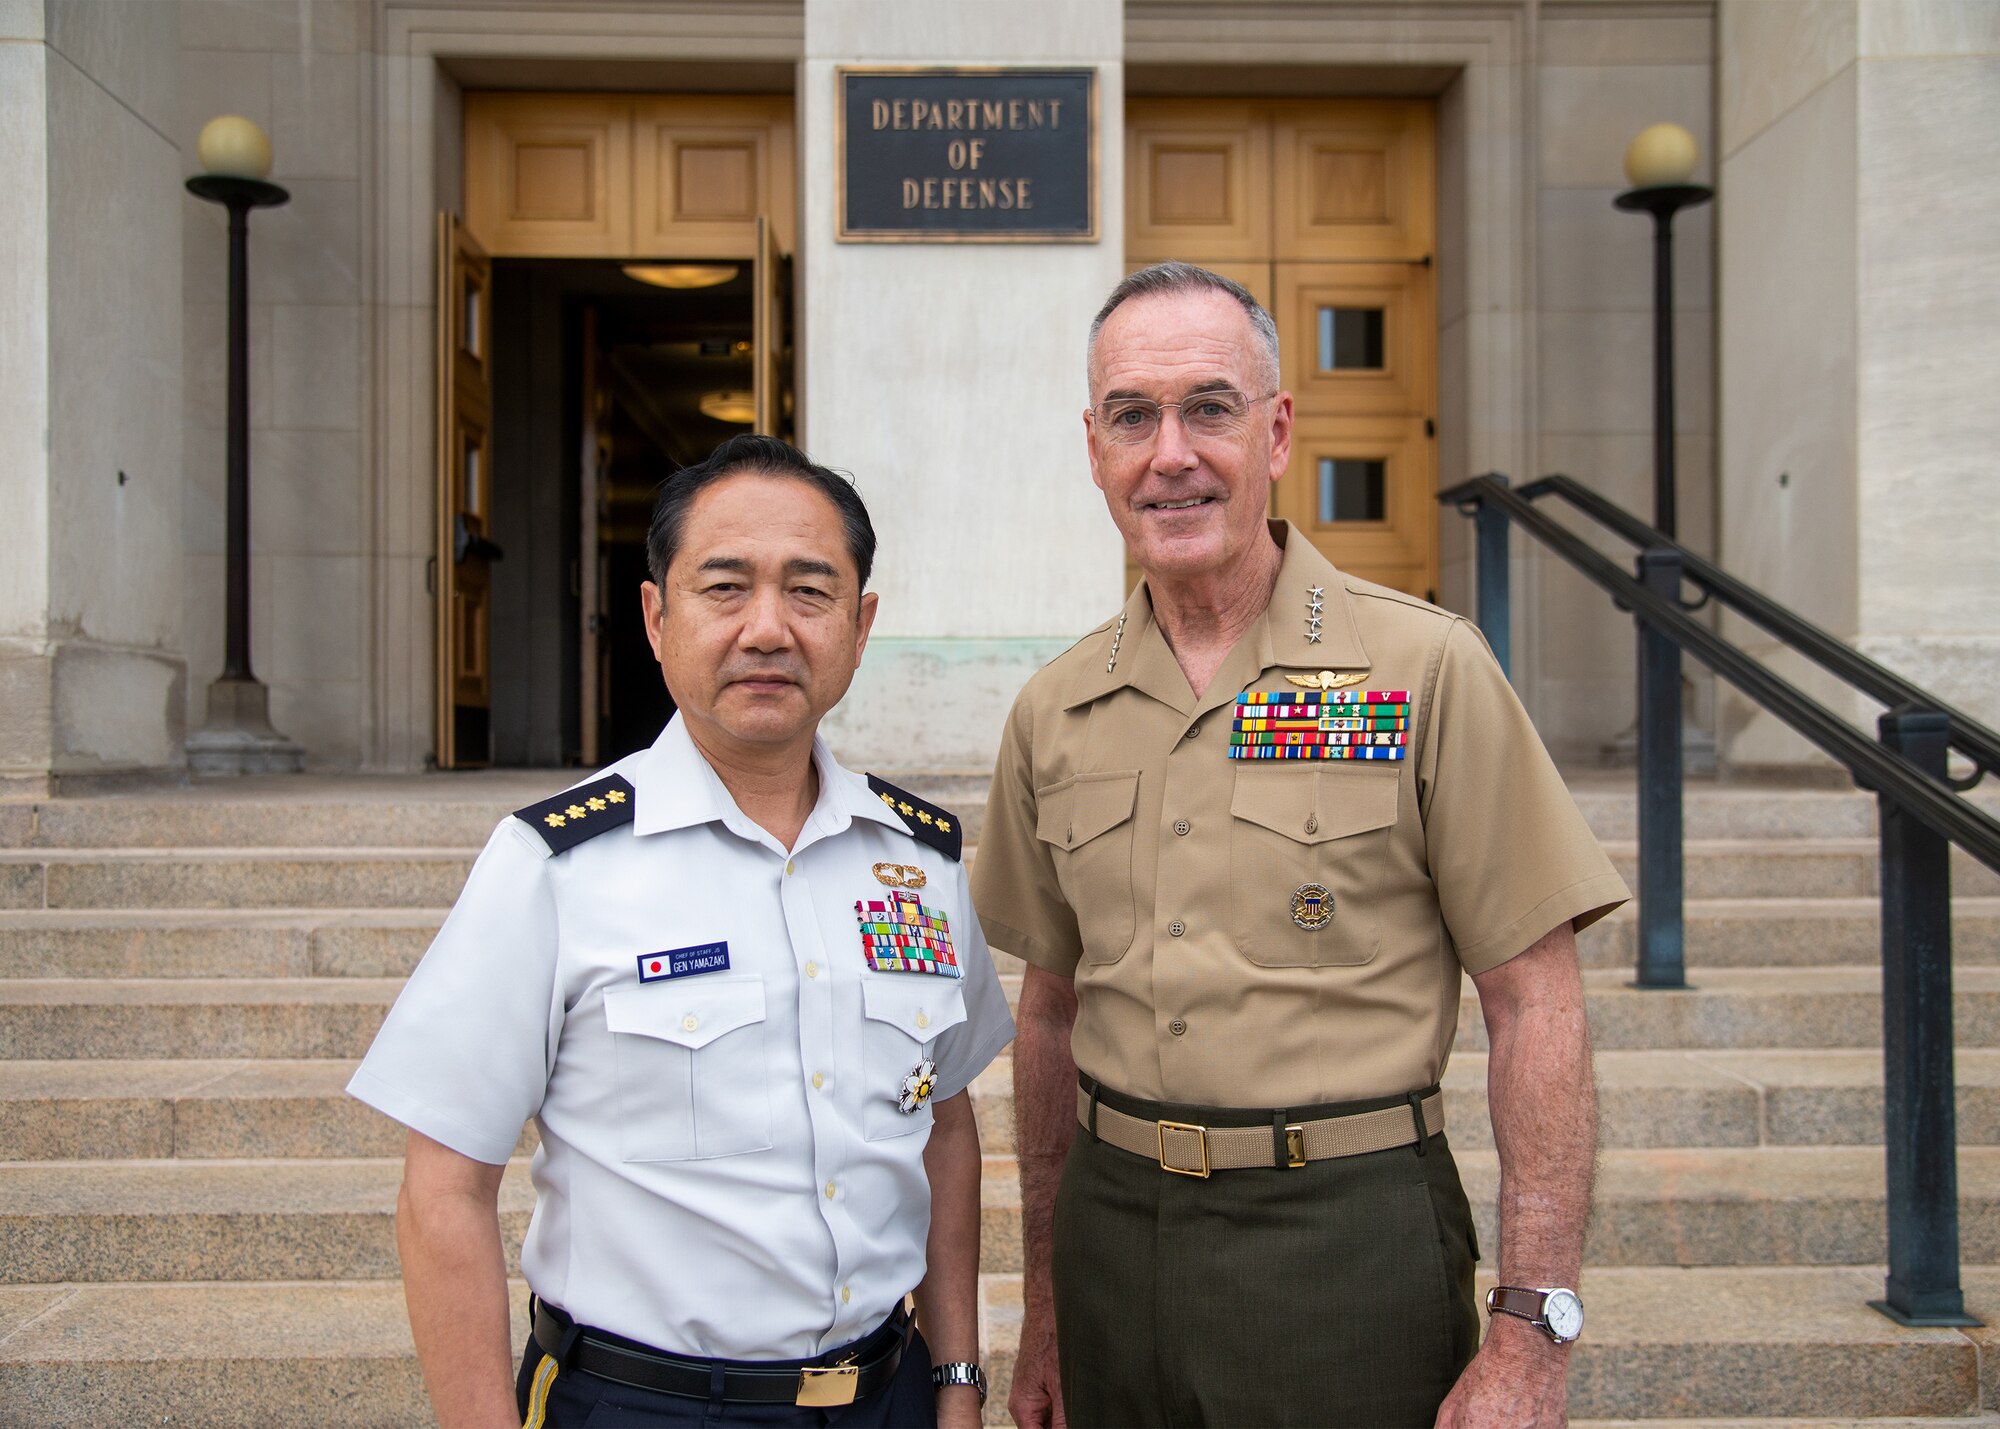 Chairman of the Joint Chiefs of Staff Gen. Joe Dunford poses for a photo with Chief of Staff, Joint Staff, Japan Self-Defense Forces, Gen. Koji Yamazaki outside the Pentagon, Washington D.C., July 31, 2019.